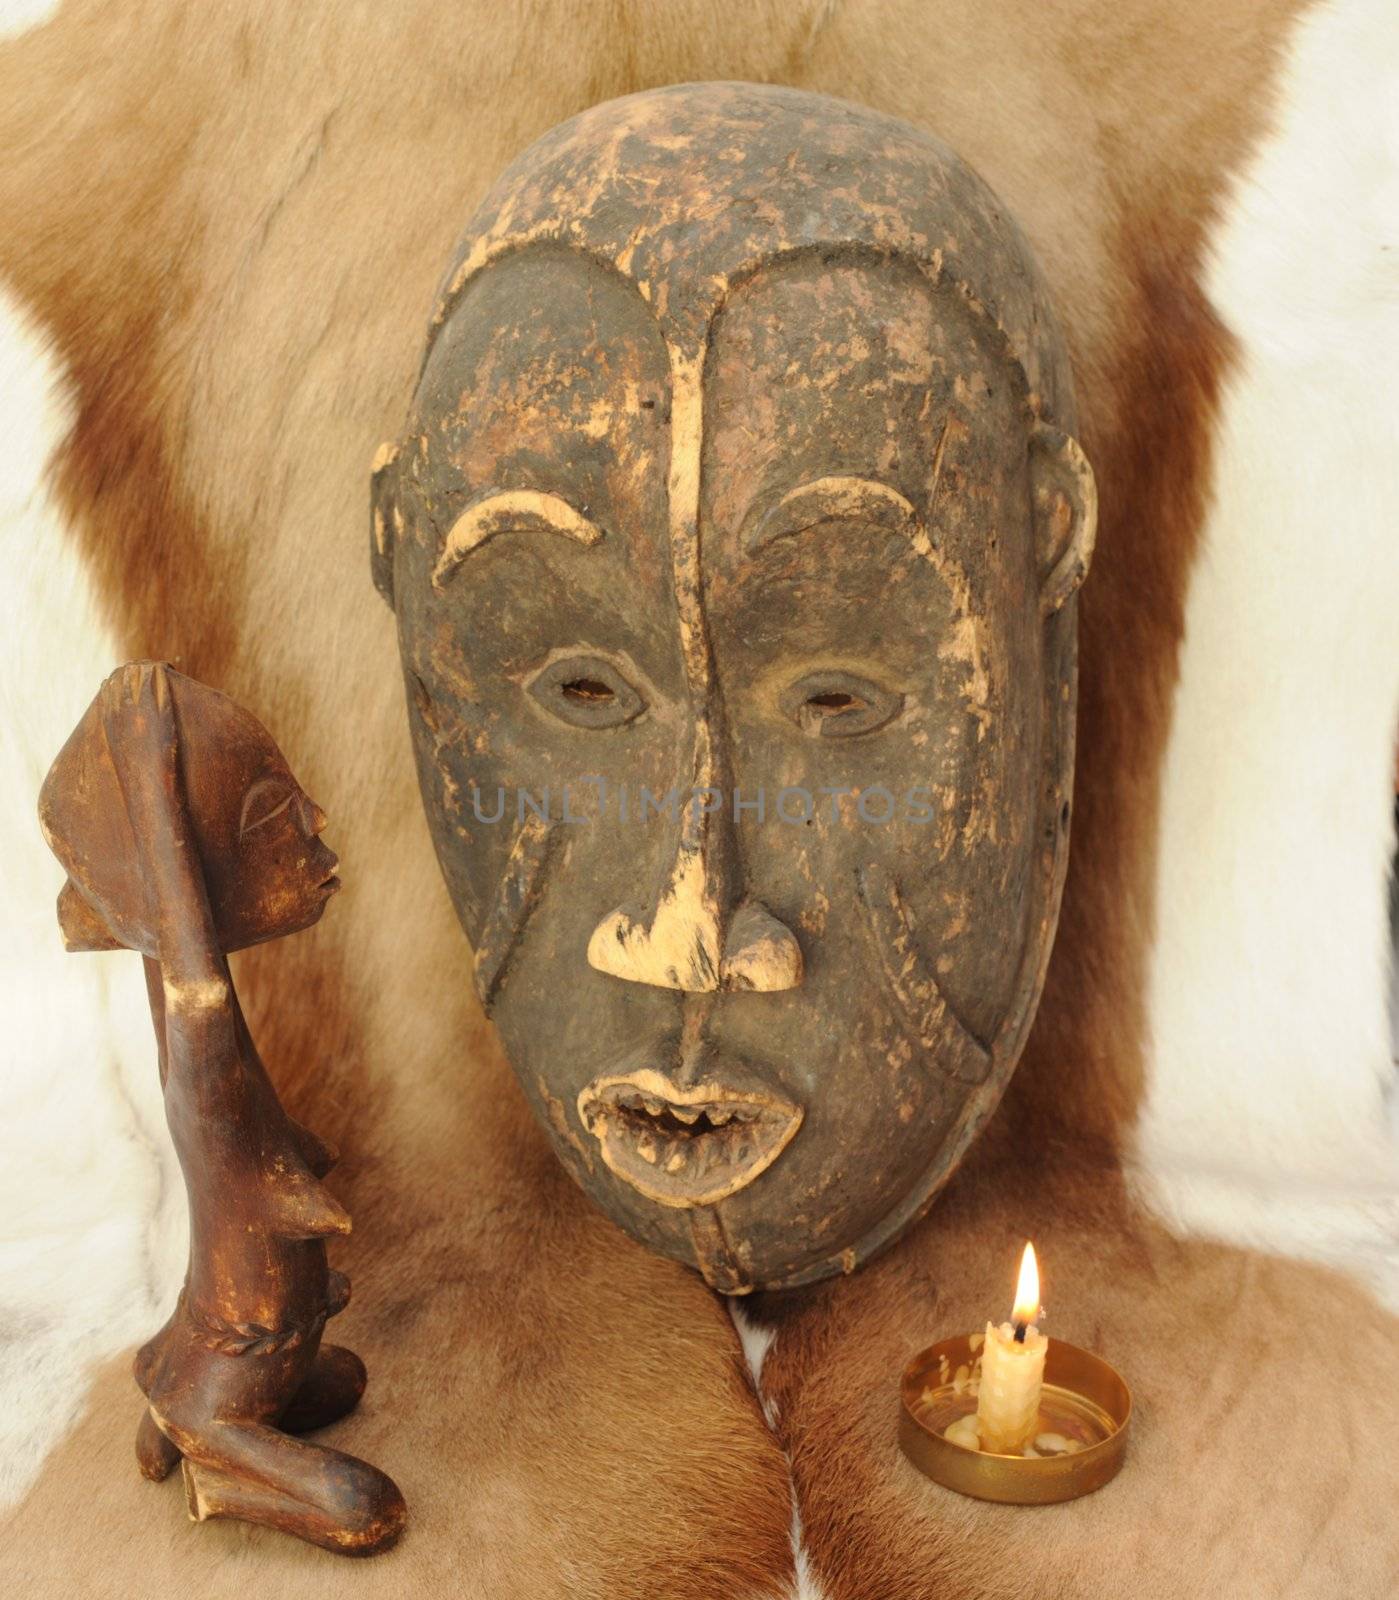 African Mask and Praying Wooden Figure on 
Natural Animal Fur.